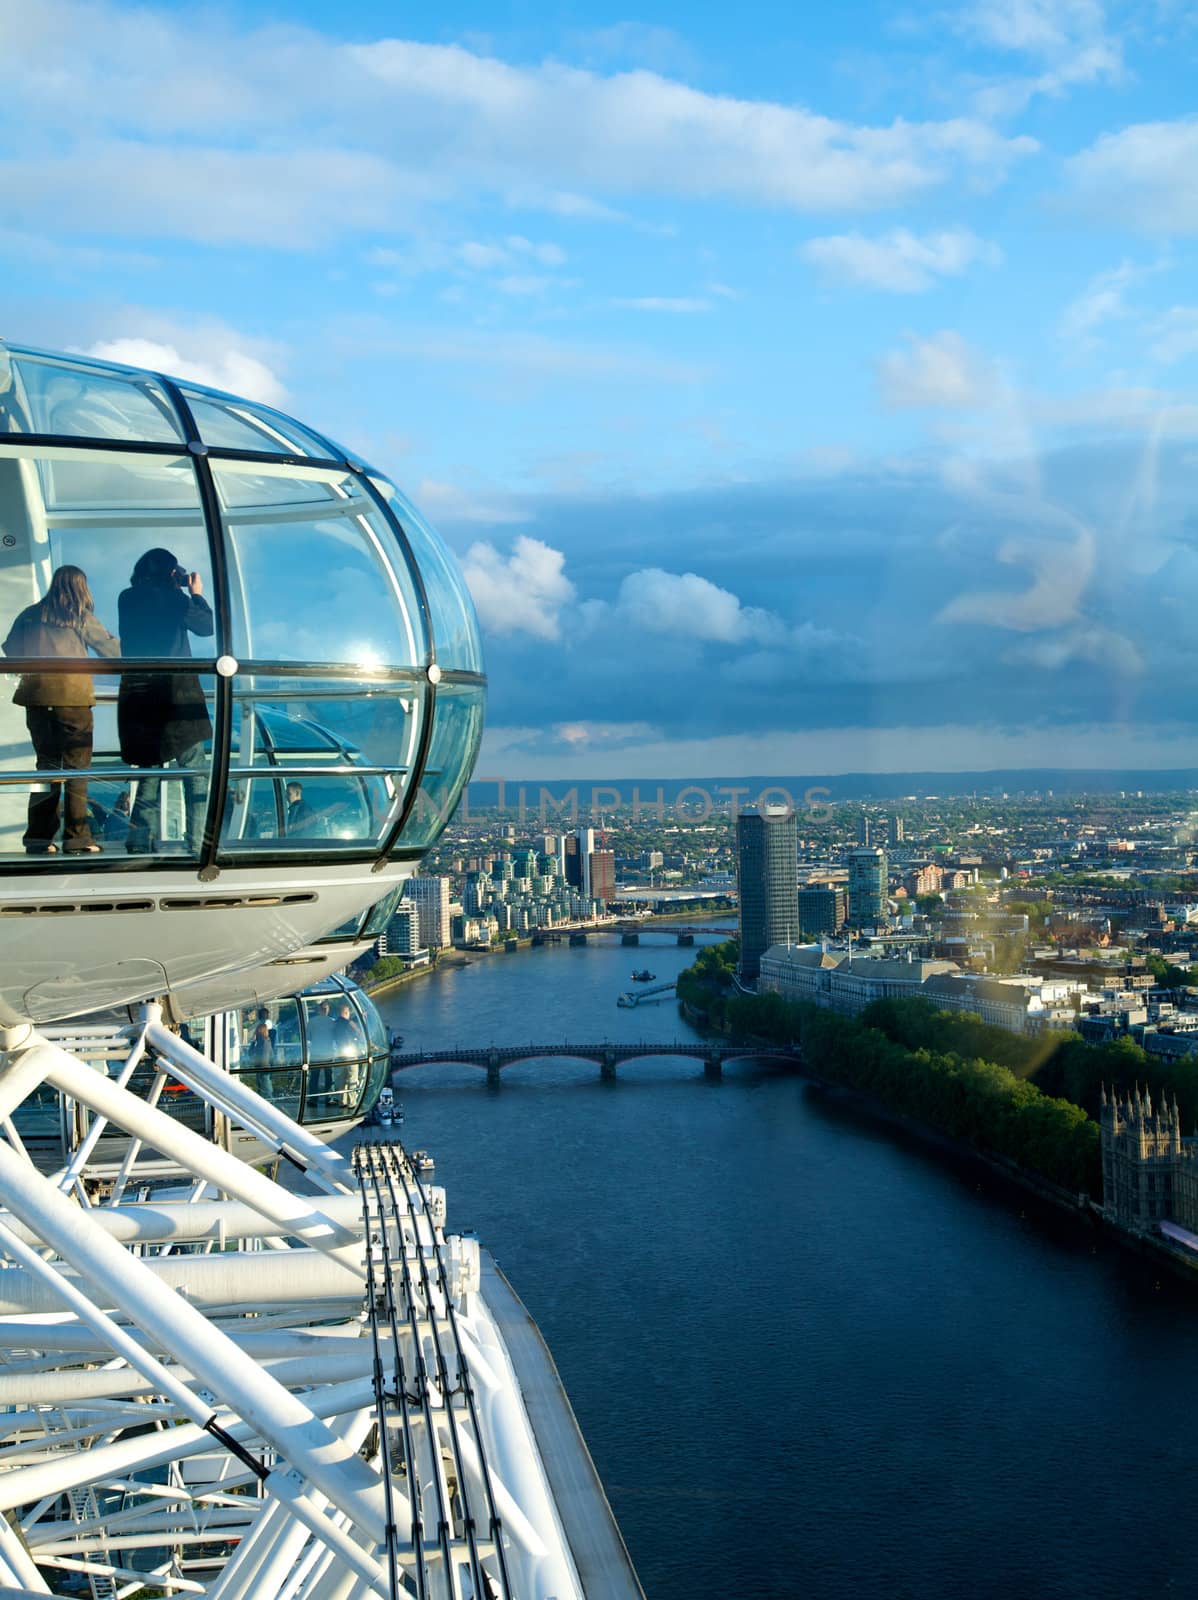 London eye and view of of the city of London, United Kingdom